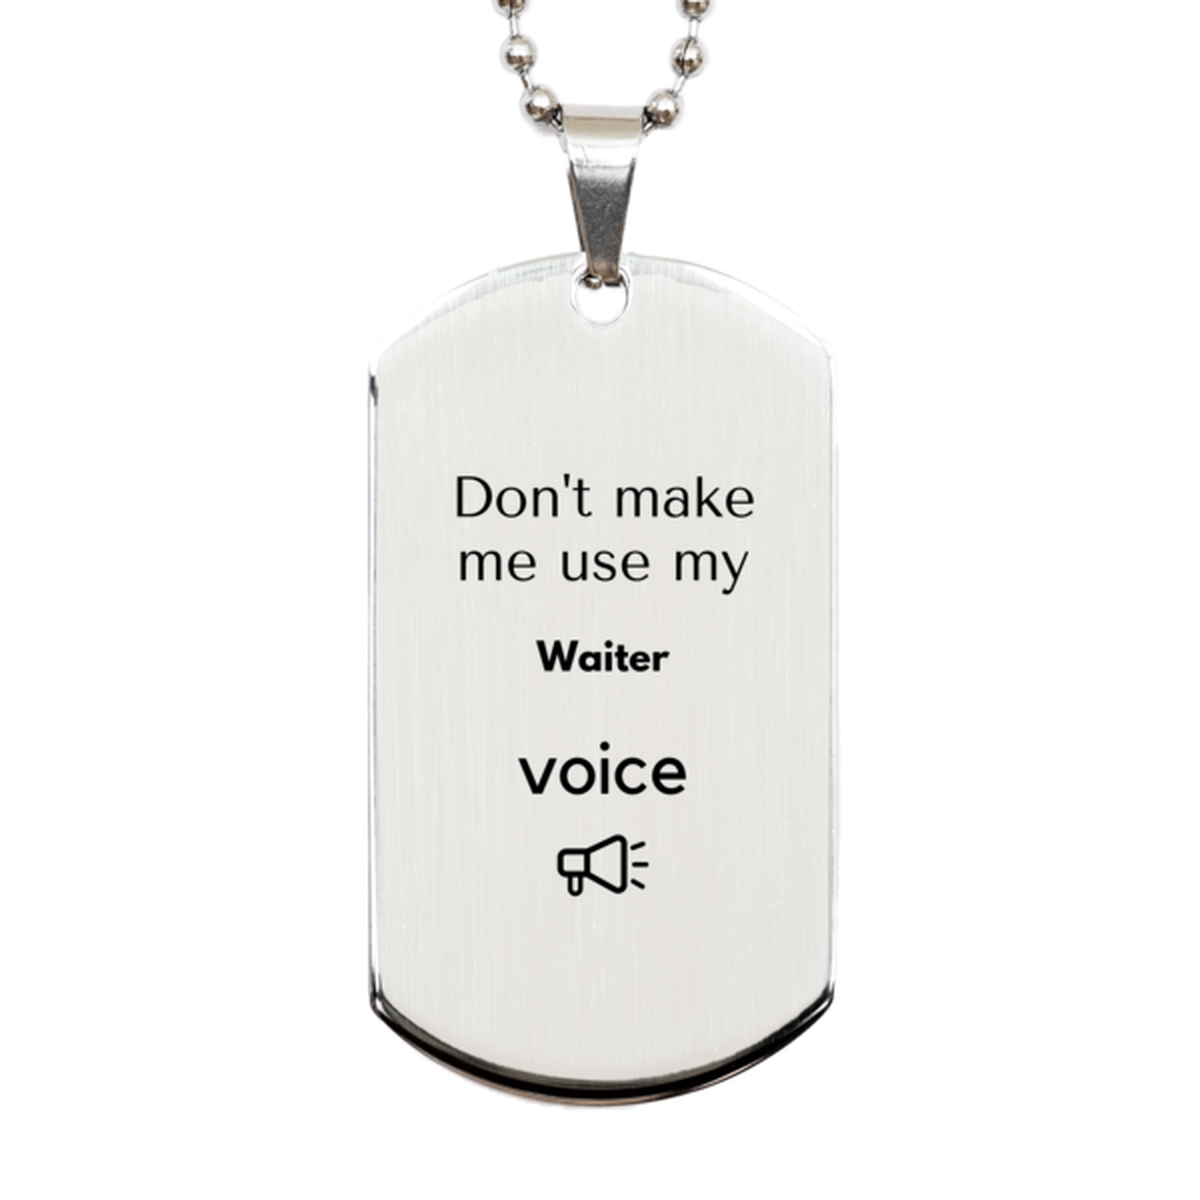 Don't make me use my Waiter voice, Sarcasm Waiter Gifts, Christmas Waiter Silver Dog Tag Birthday Unique Gifts For Waiter Coworkers, Men, Women, Colleague, Friends